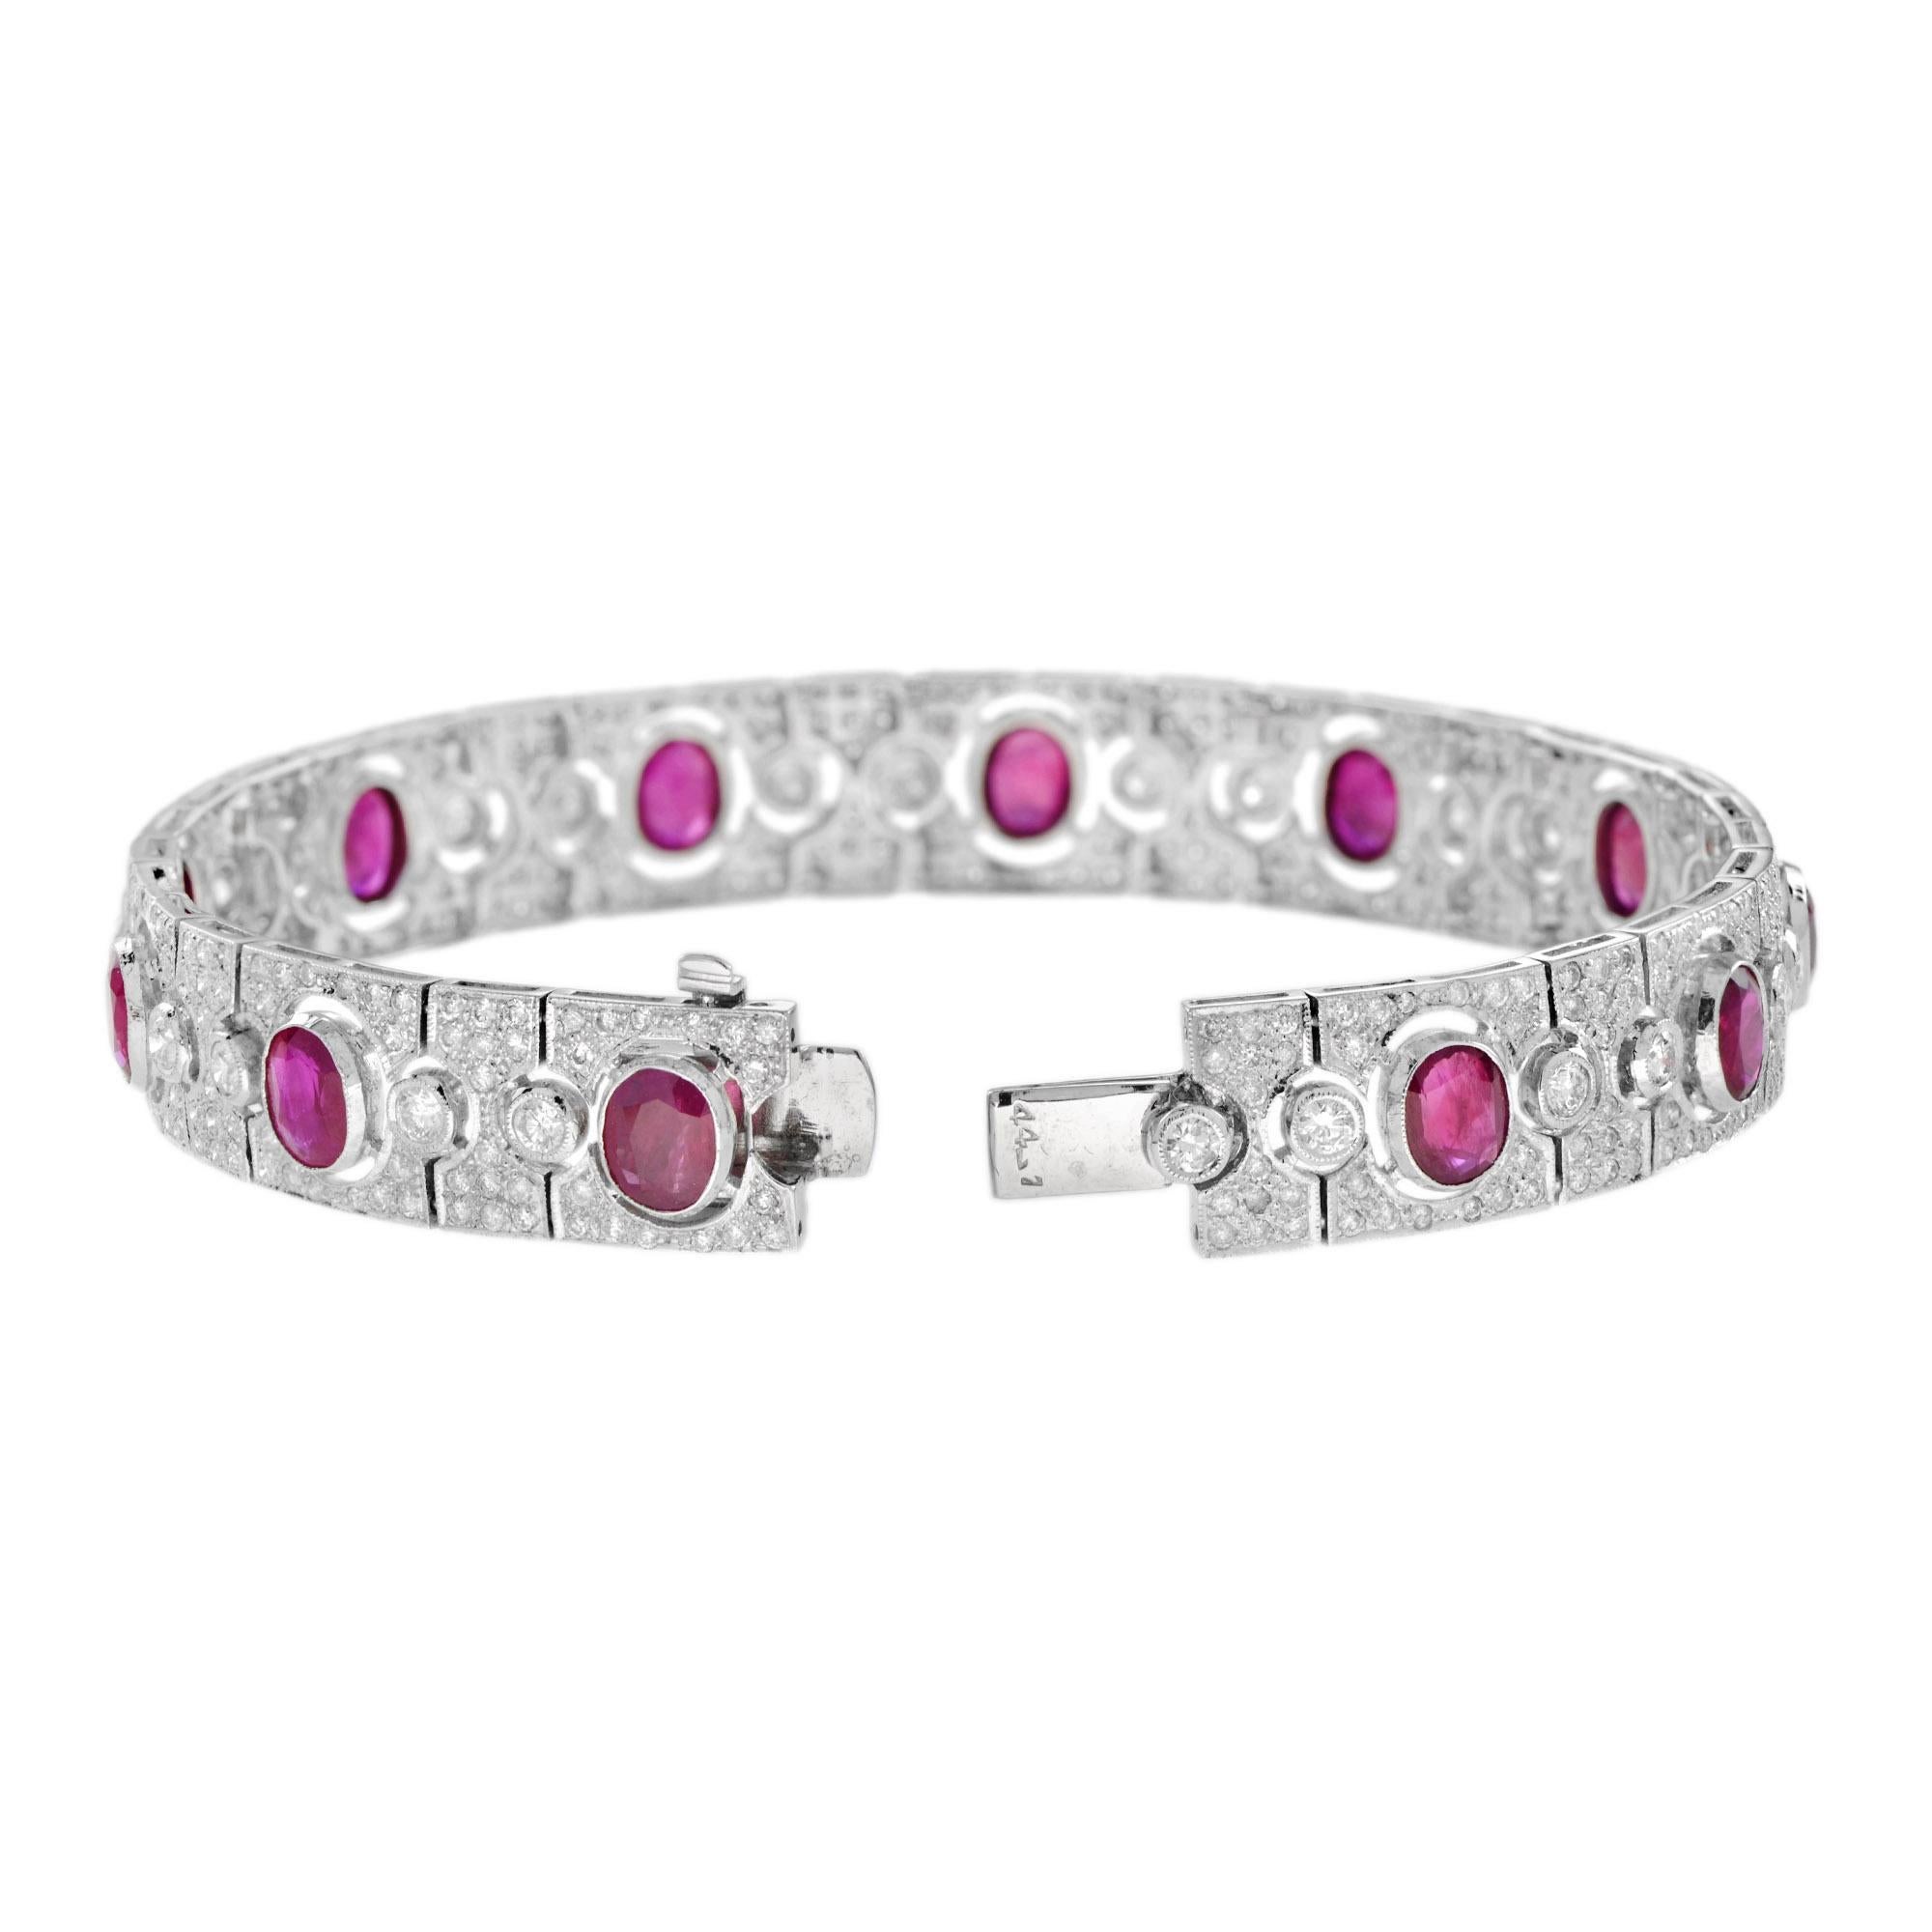 Women's Art Deco Style 8.87 Ct. Oval Ruby and Diamond Bracelet in 18K White Gold For Sale